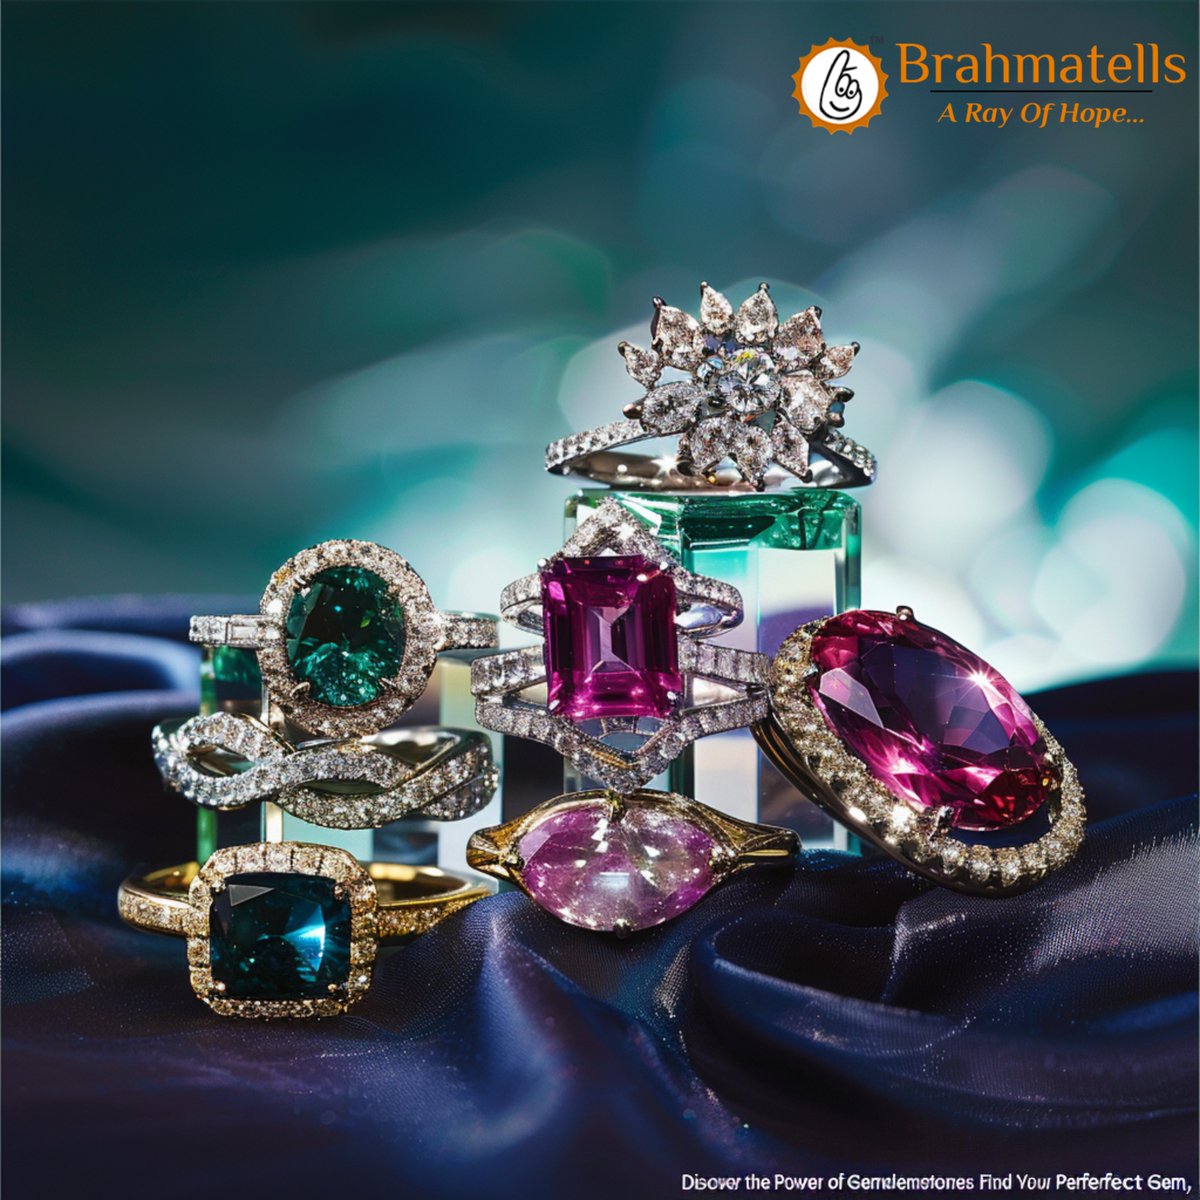 At Brahmatells, gemstone rings are guardians of the spirit. From Amethyst serenity to Onyx grounding force, each ring holds a profound narrative. Find your spirit stone and carry a talisman of peace, love, or wisdom. See our mystical collection. #GemstoneRings #SpiritualJourney